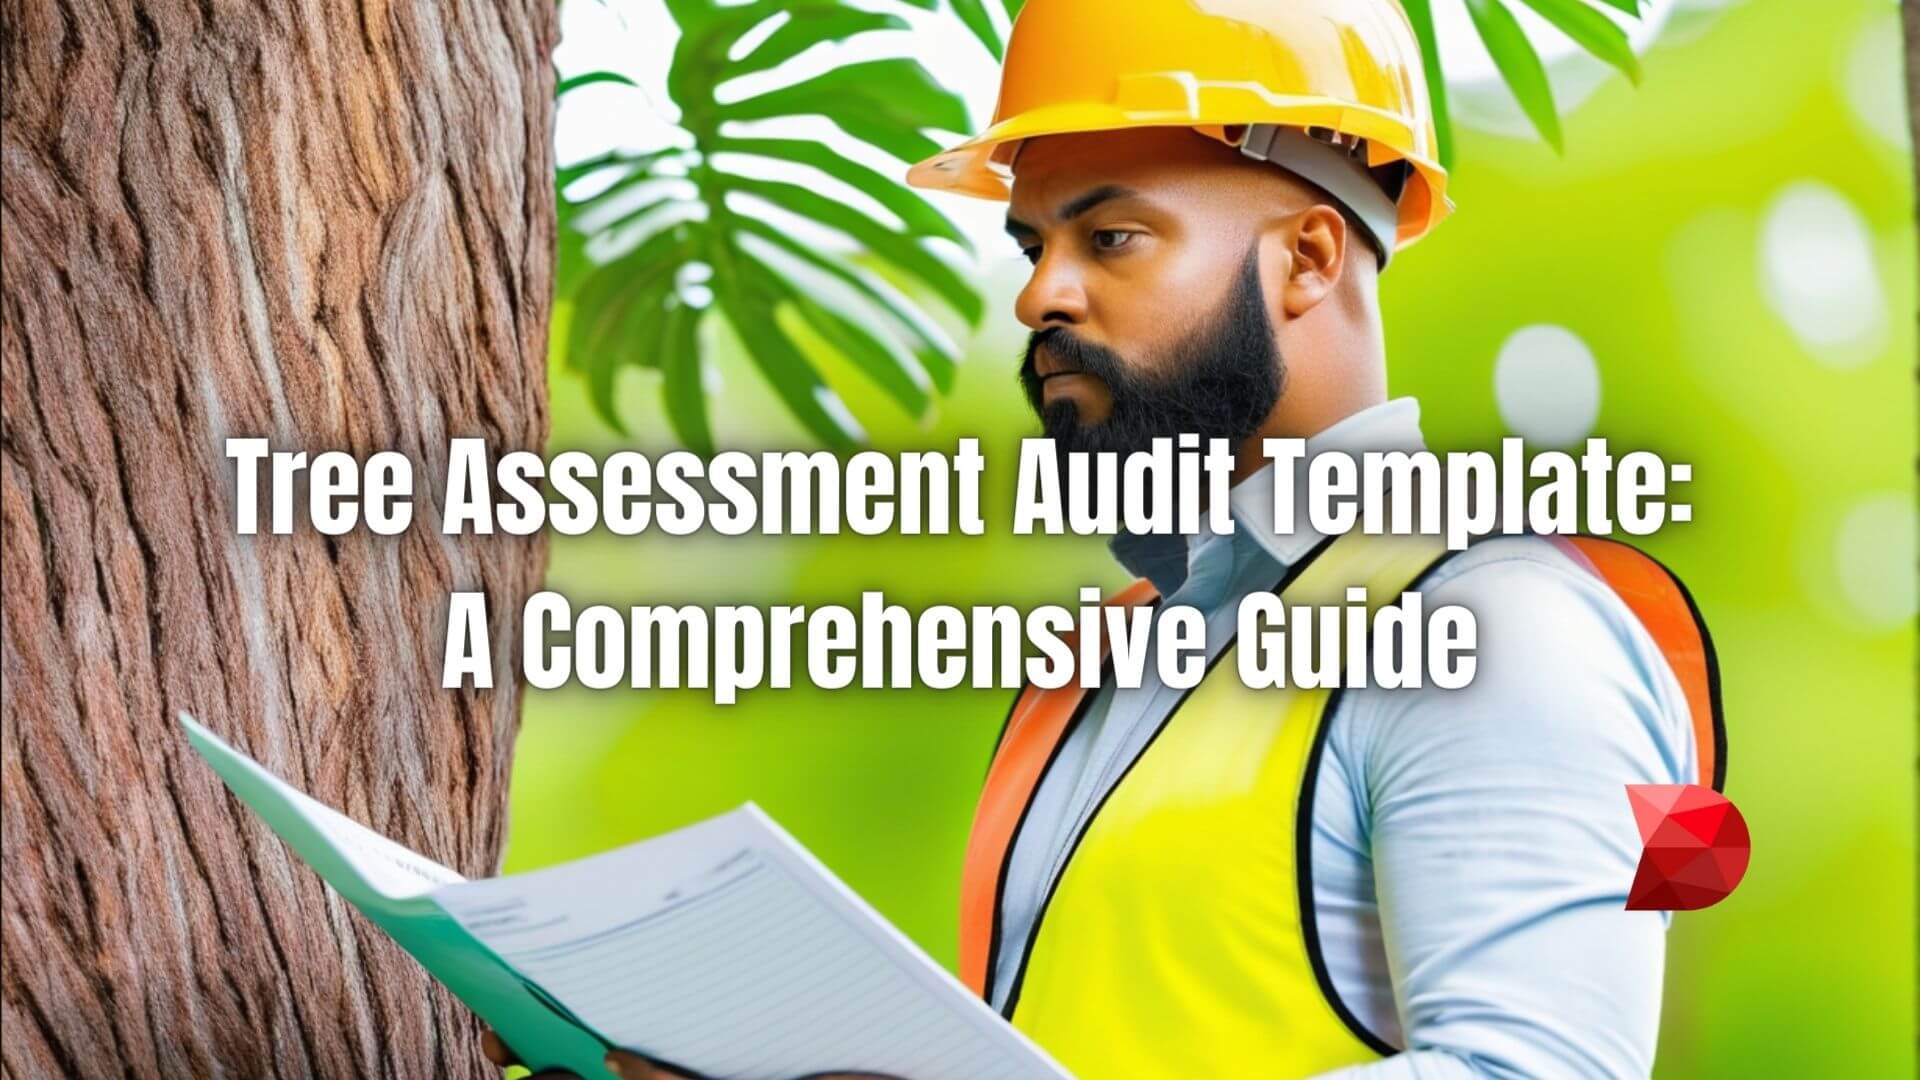 A Tree Assessment Audit Template is used by auditors to evaluate the health, safety, and conservation status of trees. Learn more!